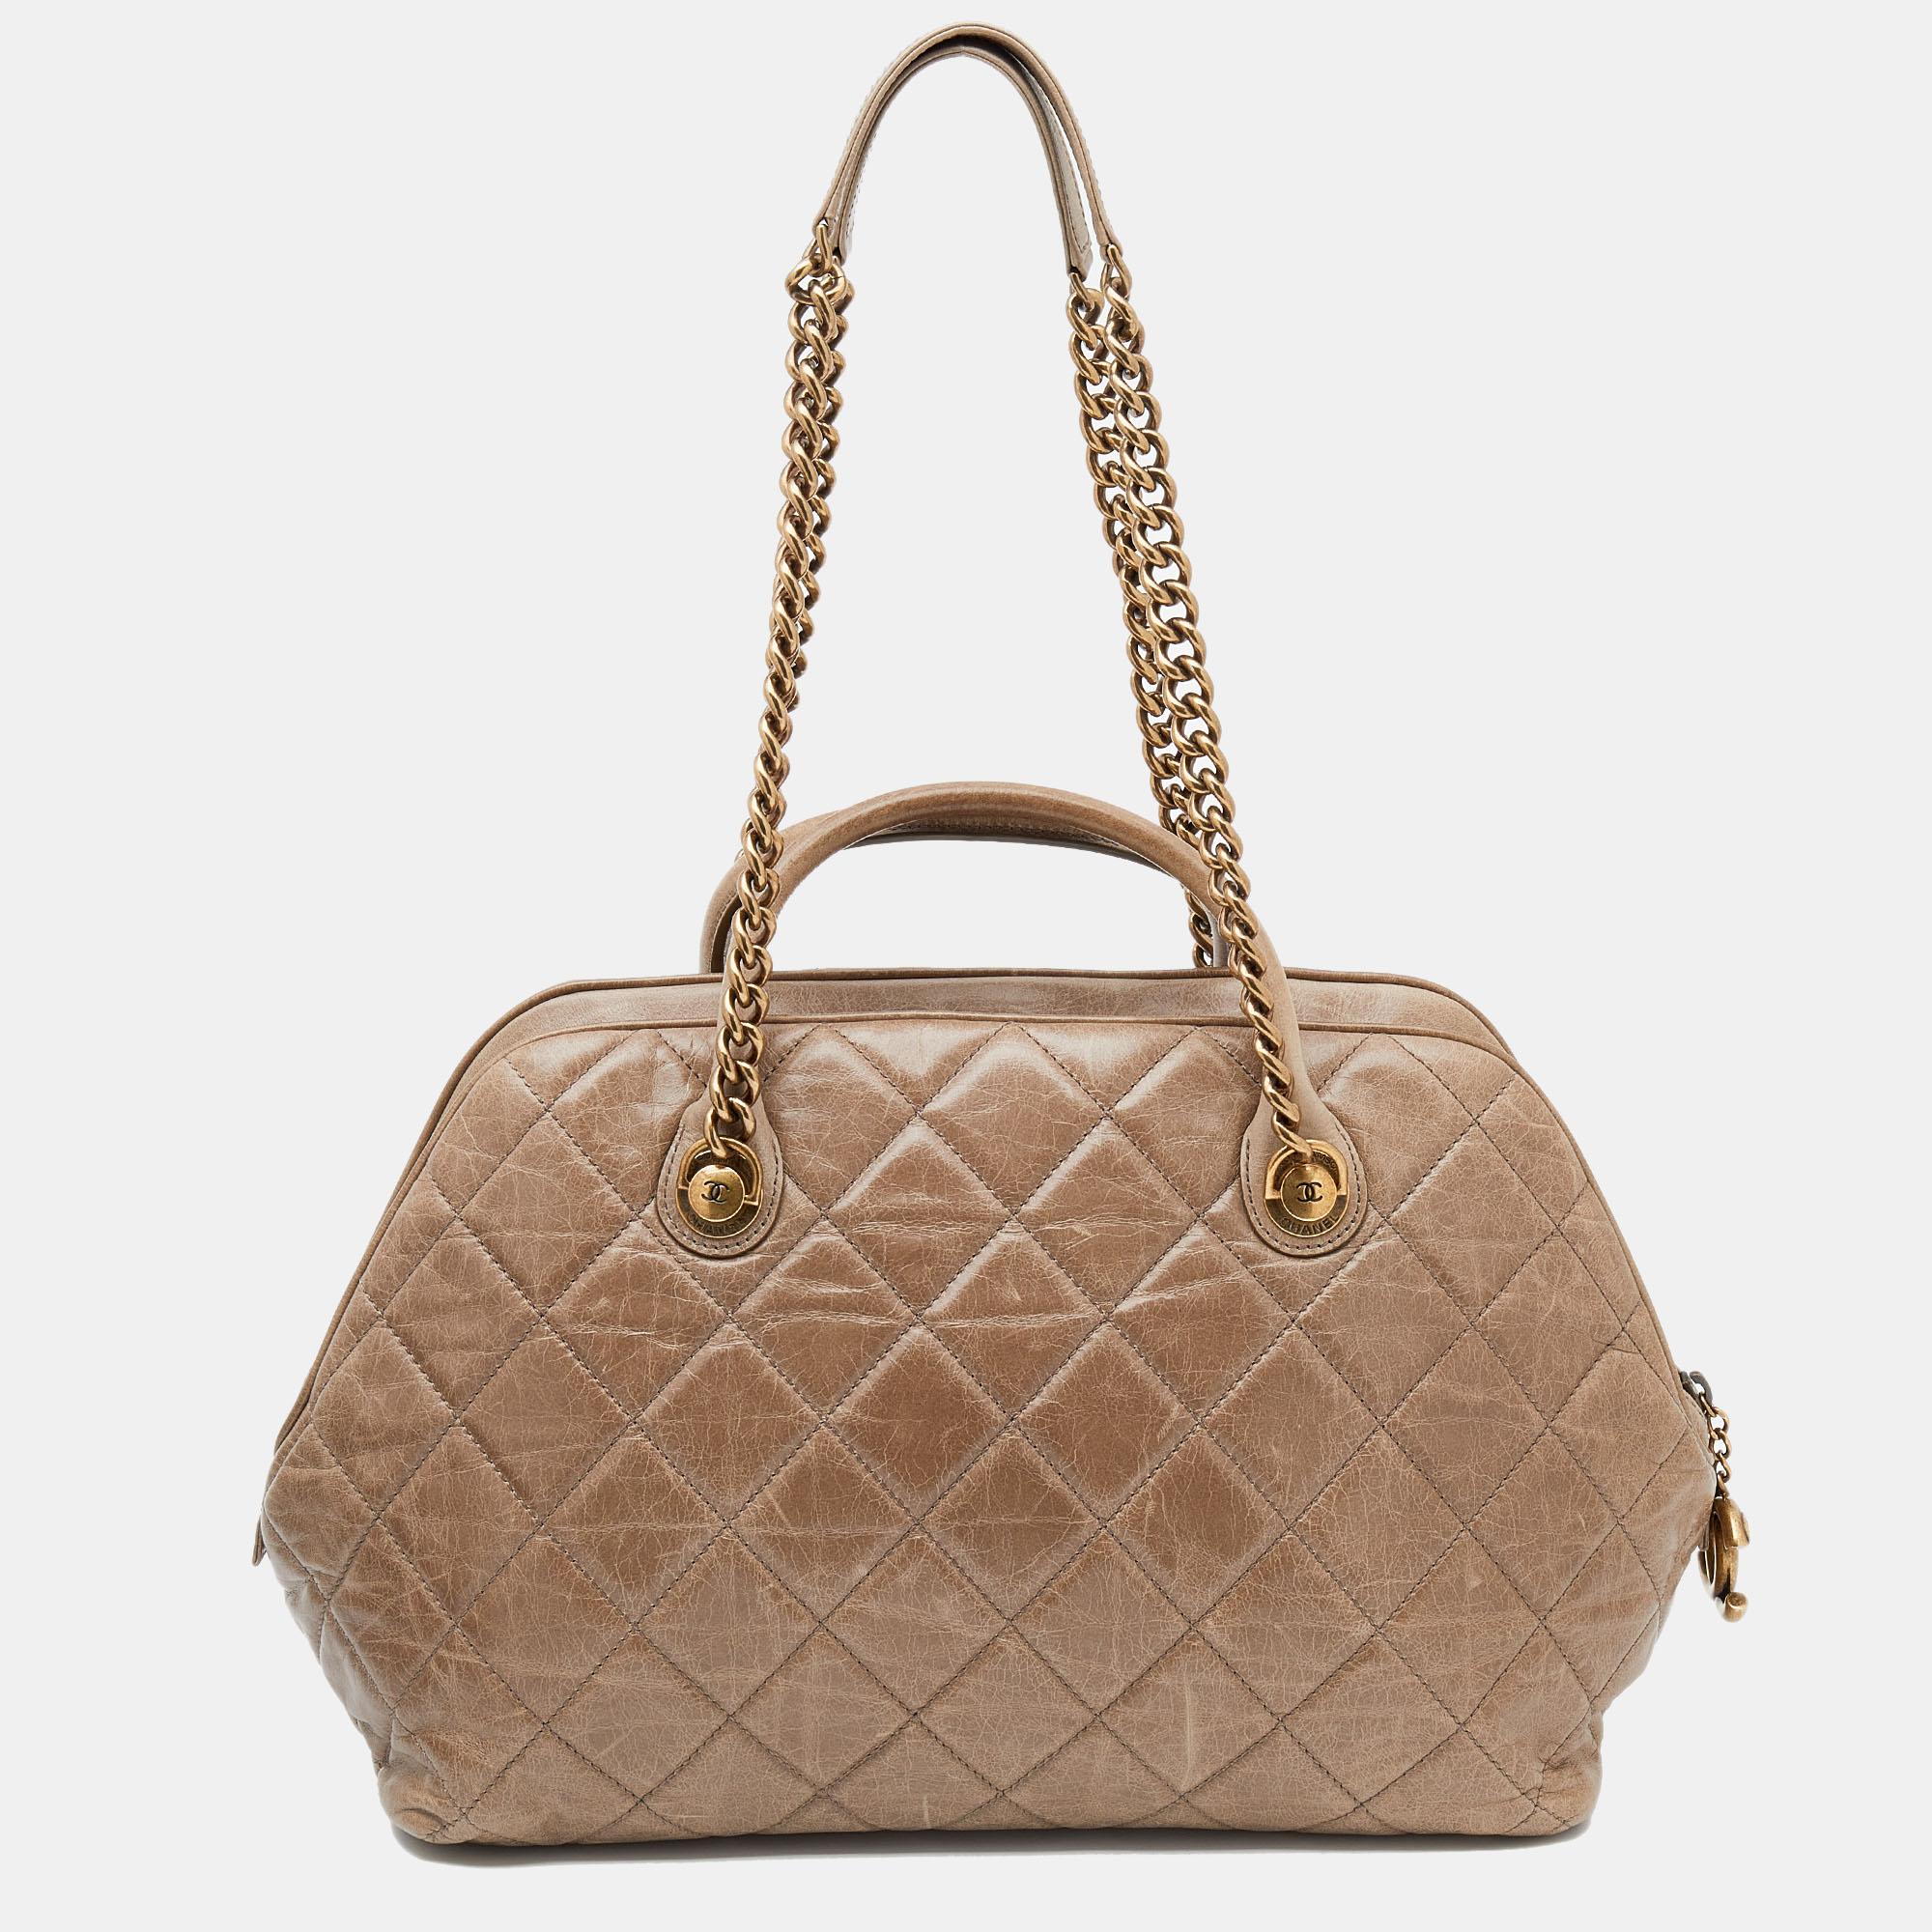 Chanel Dark Beige Quilted Leather Castle Rock Bowling Bag 5